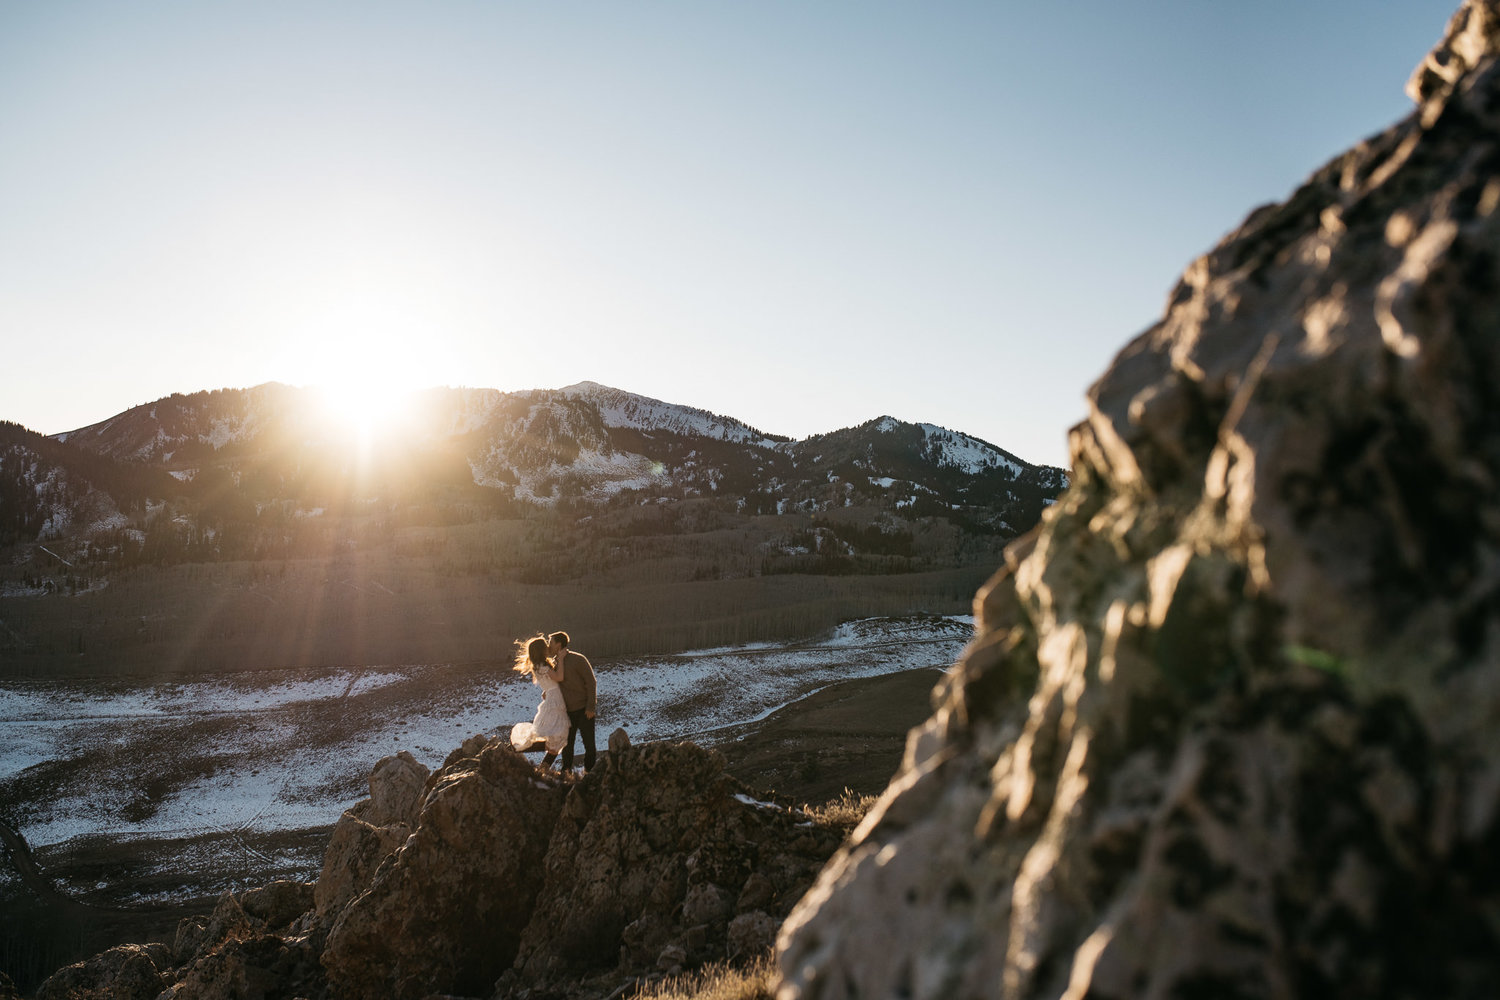 A couple kissing while standing on top of a cliff as the sun shines through from behind the mountains in the background